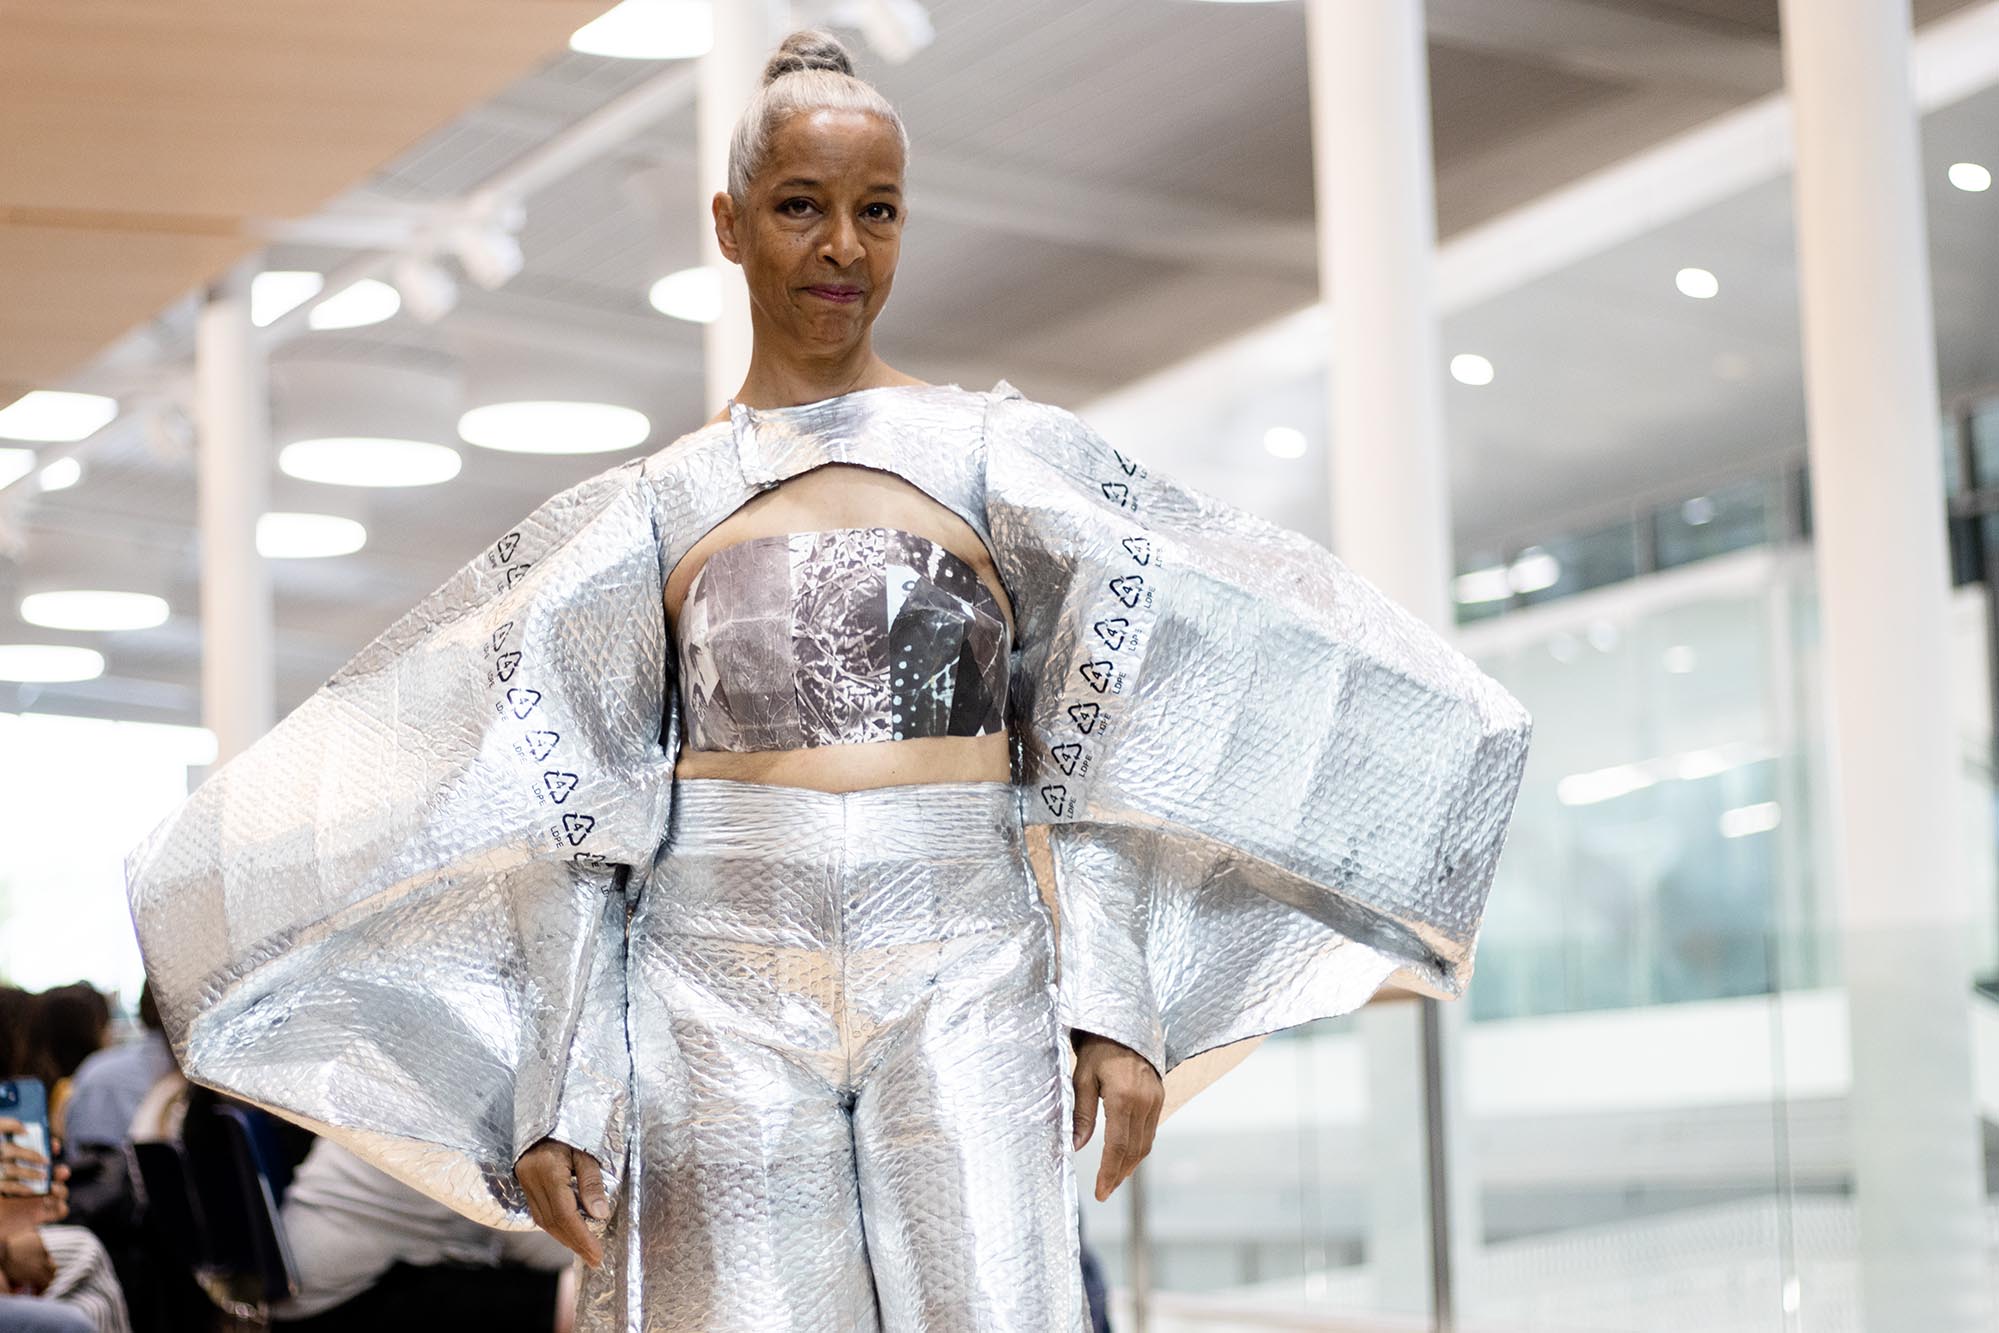 Re-Fashioned 2023. Model Roxane D’Orrleans Juste wears an outfit fashioned out of bubble wrap and packing materials. Designed by Natalia Espinel-Porras and Kelsea Andrade.